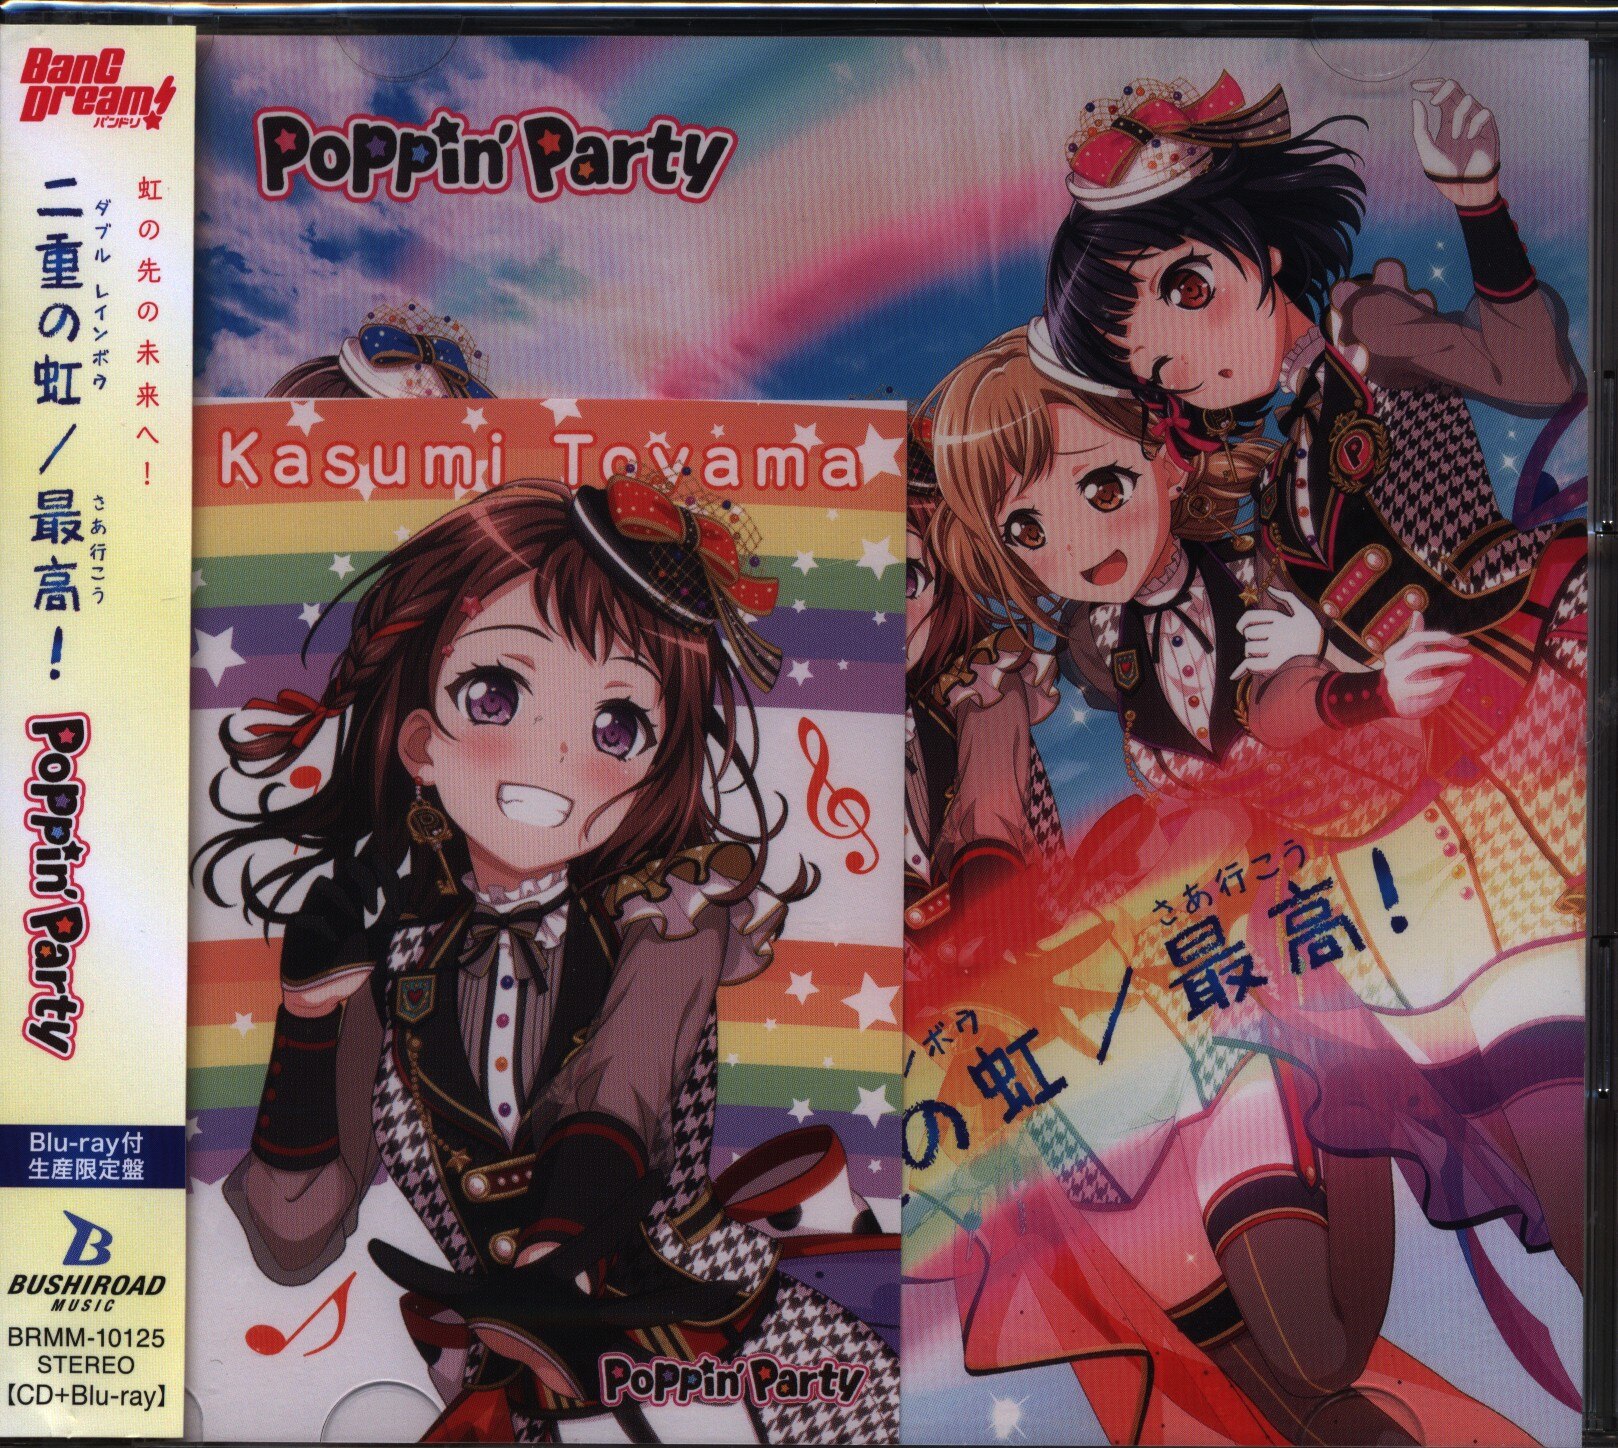 Girls　span>)二重の虹/最高!　with　Poppin'Party　Online　Band　Mandarake　span>付生産限定盤　Party!　First　card<　edition<　Blu-ray<　span>　Shop　BanG　Dream!